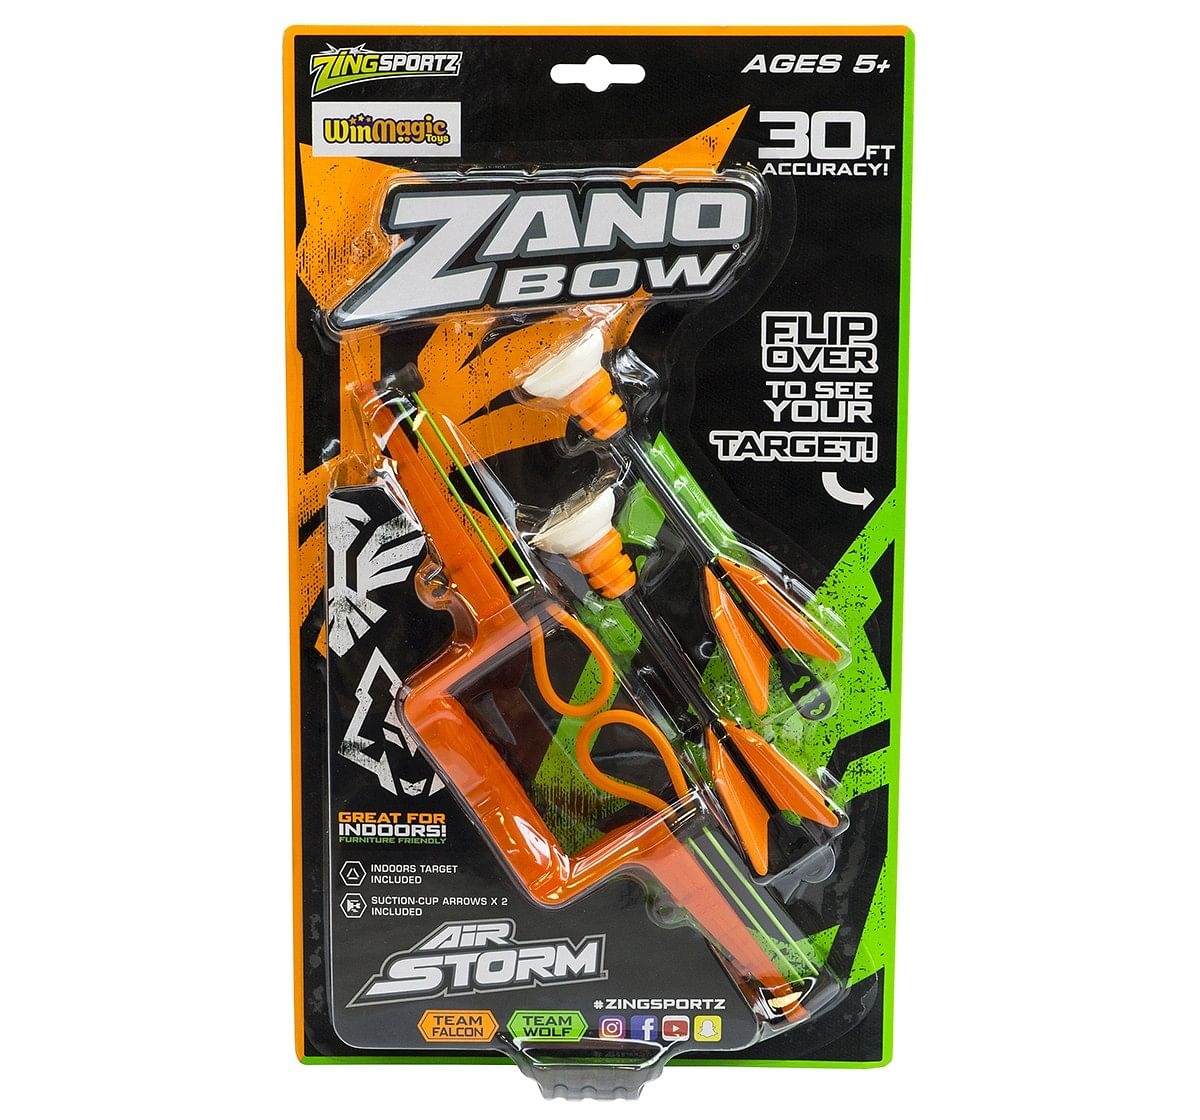 Zing Air Strom Zano Bow Outdoor Sports for Kids age 8Y+ 